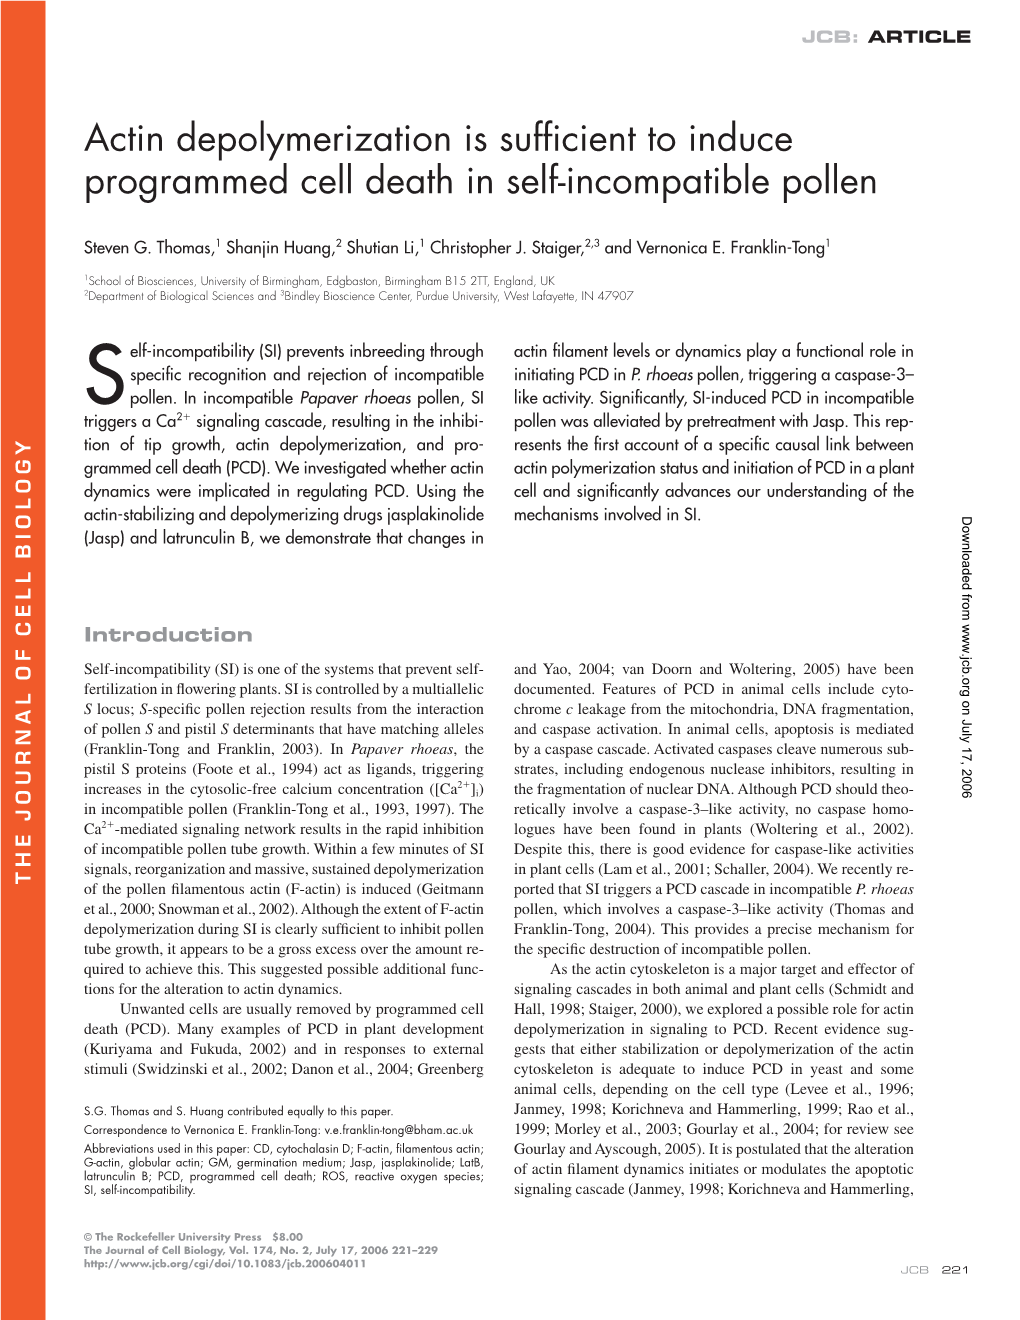 Actin Depolymerization Is Sufficient to Induce Programmed Cell Death in Self-Incompatible Pollen